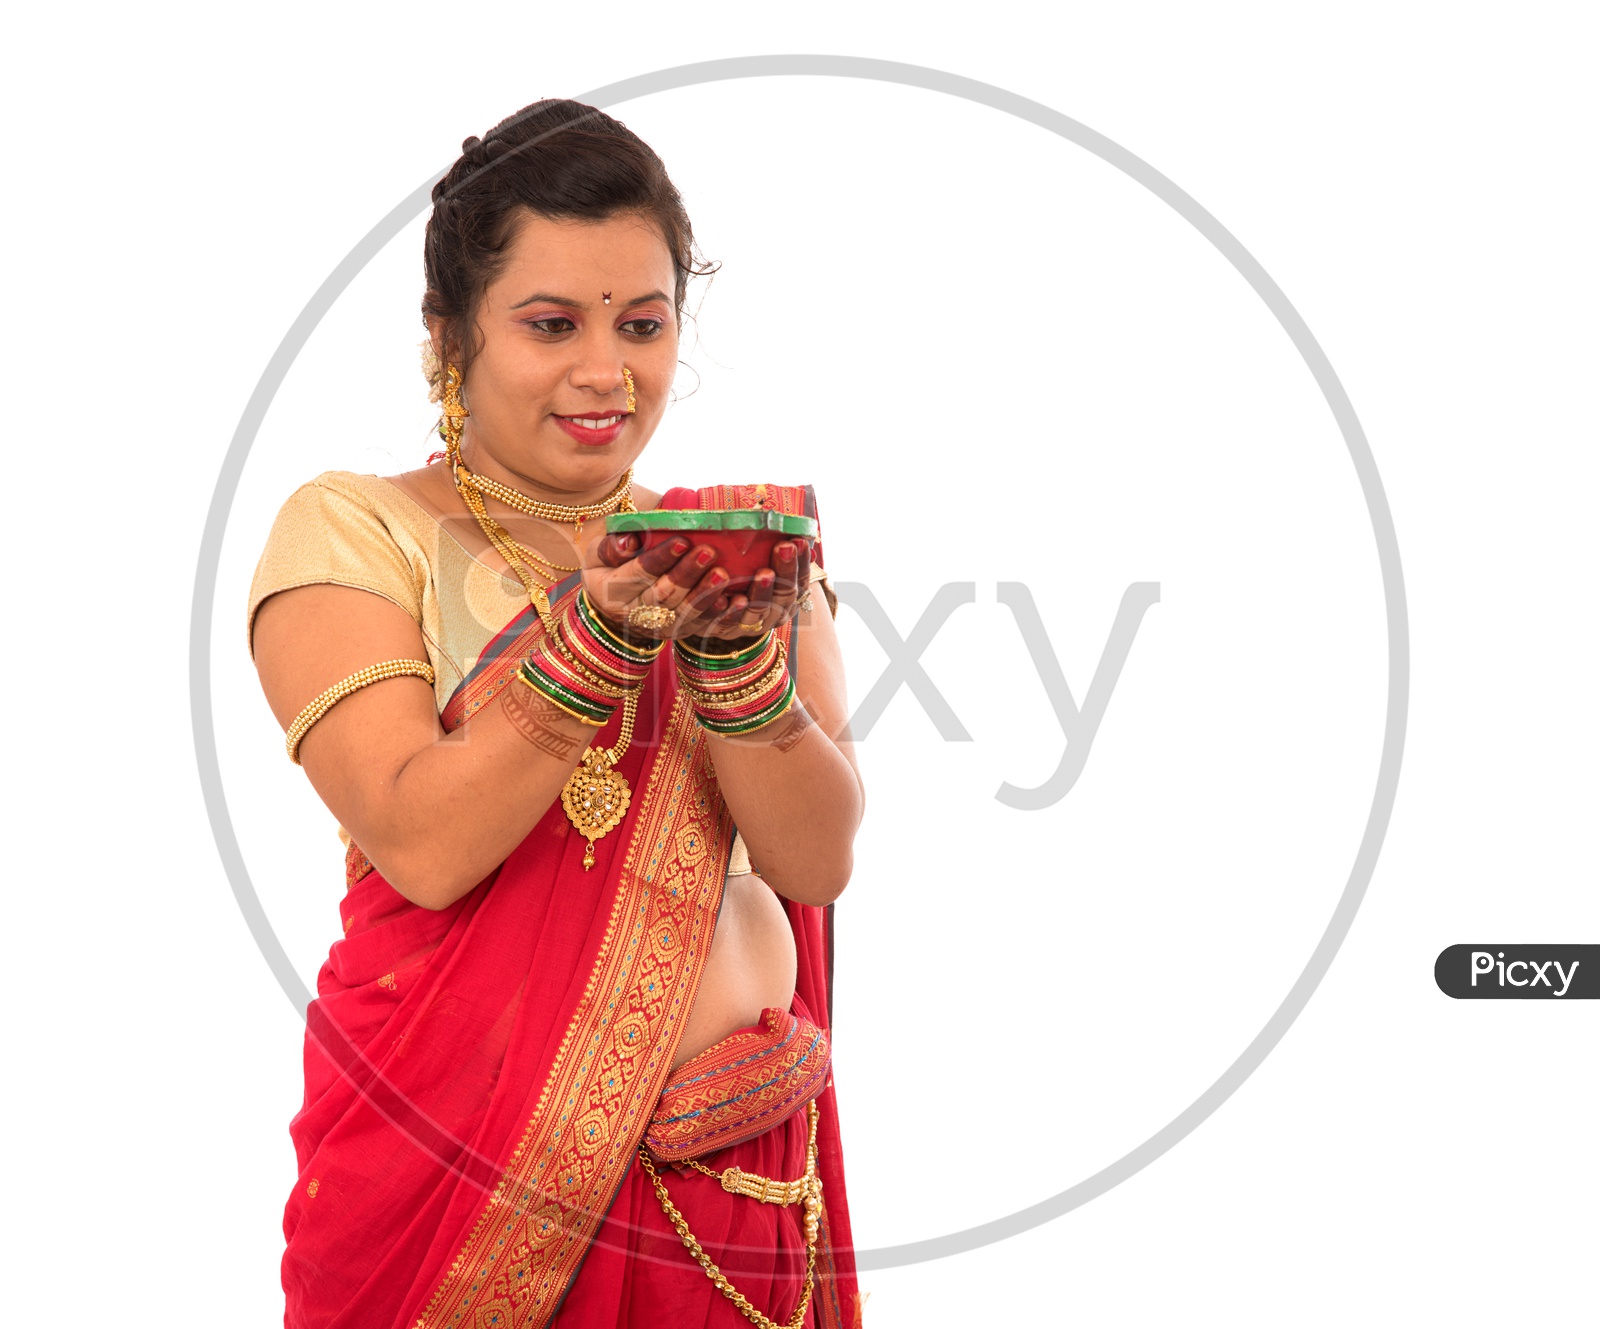 A Traditional Indian Marathi  Woman  Holding Diwali Diya In Hand  On an Isolated White Background